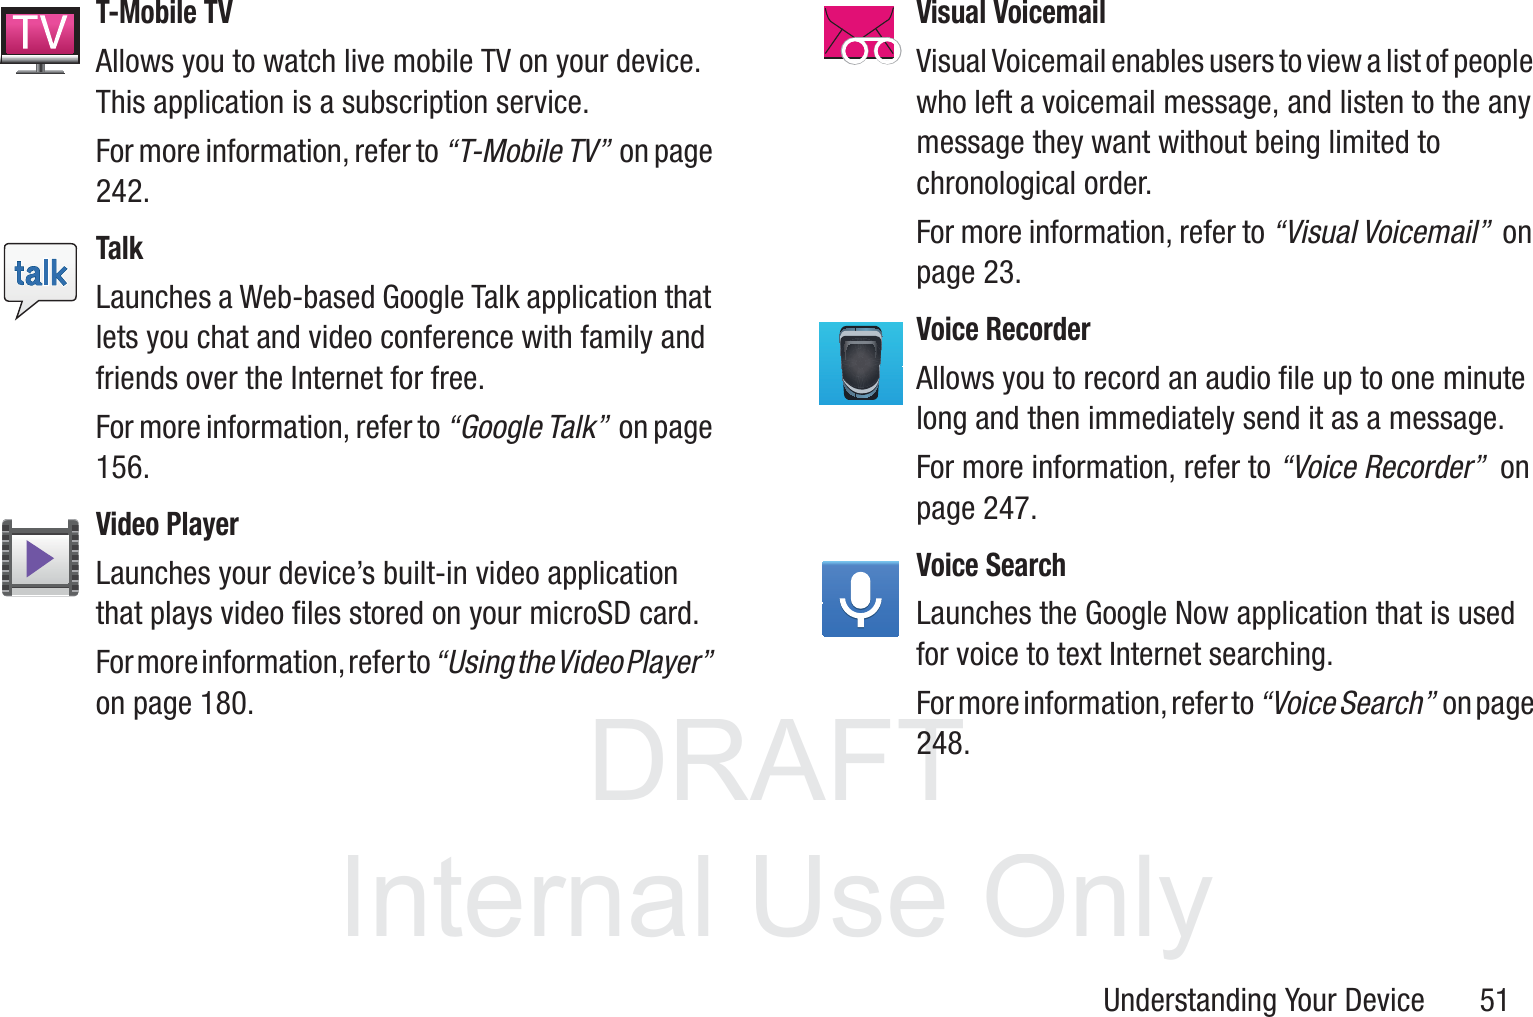 DRAFT InternalUse OnlyUnderstanding Your Device       51T-Mobile TVAllows you to watch live mobile TV on your device. This application is a subscription service. For more information, refer to “T-Mobile TV”  on page 242.TalkLaunches a Web-based Google Talk application that lets you chat and video conference with family and friends over the Internet for free. For more information, refer to “Google Talk”  on page 156.Video PlayerLaunches your device’s built-in video application that plays video files stored on your microSD card. For more information, refer to “Using the Video Player”  on page 180.Visual VoicemailVisual Voicemail enables users to view a list of people who left a voicemail message, and listen to the any message they want without being limited to chronological order.For more information, refer to “Visual Voicemail”  on page 23.Voice RecorderAllows you to record an audio file up to one minute long and then immediately send it as a message. For more information, refer to “Voice Recorder”  on page 247.Voice SearchLaunches the Google Now application that is used for voice to text Internet searching.For more information, refer to “Voice Search”  o n  p a g e  248.